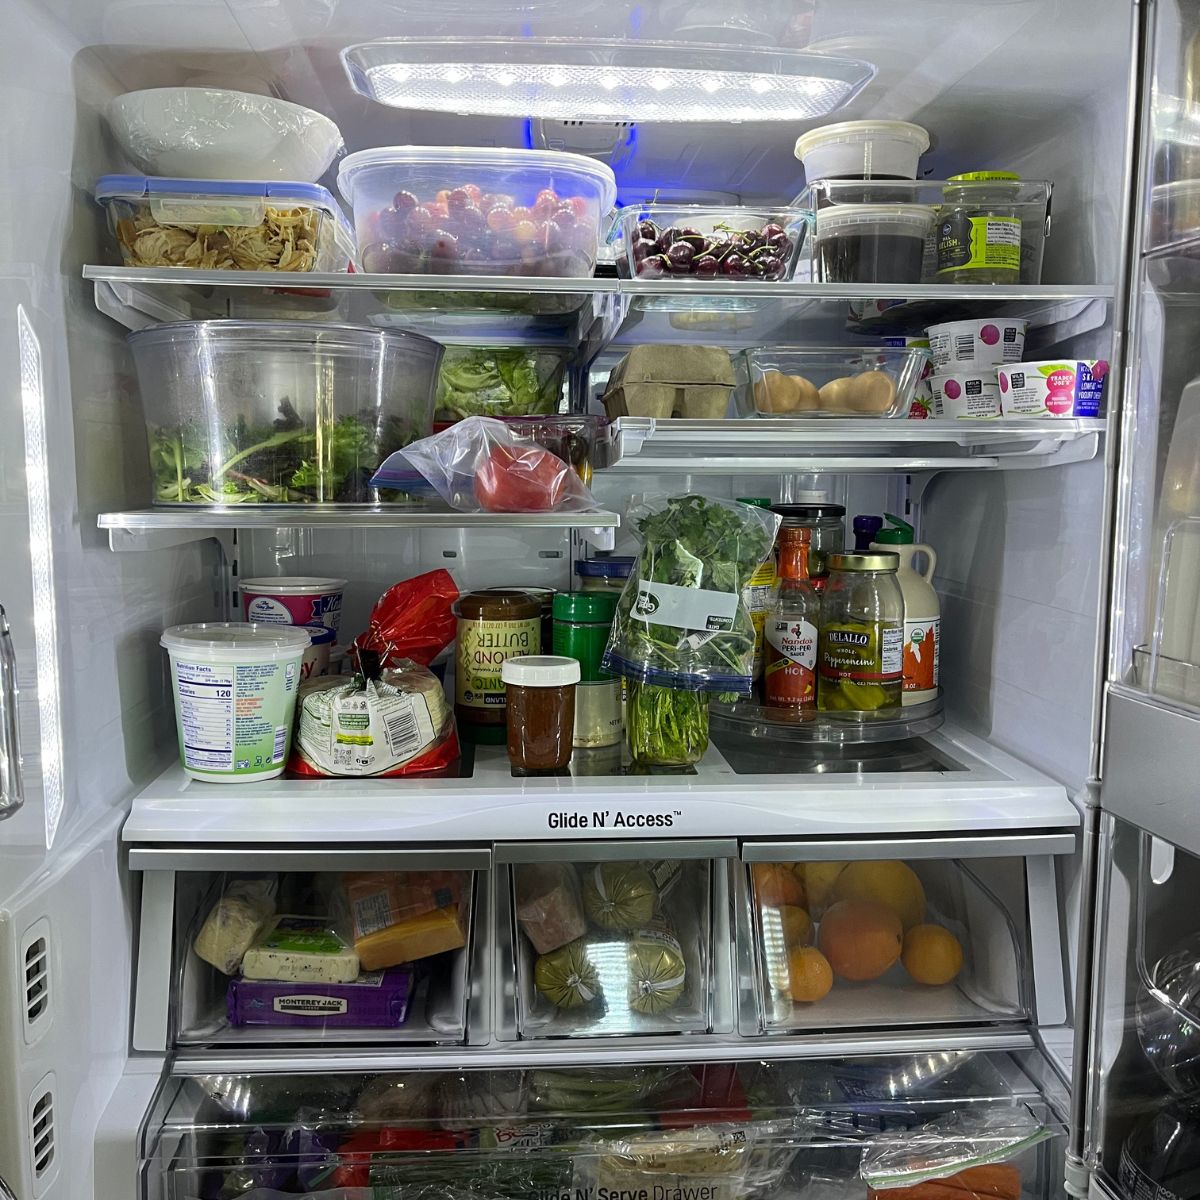 view of clean and tidy double door refrigerator.